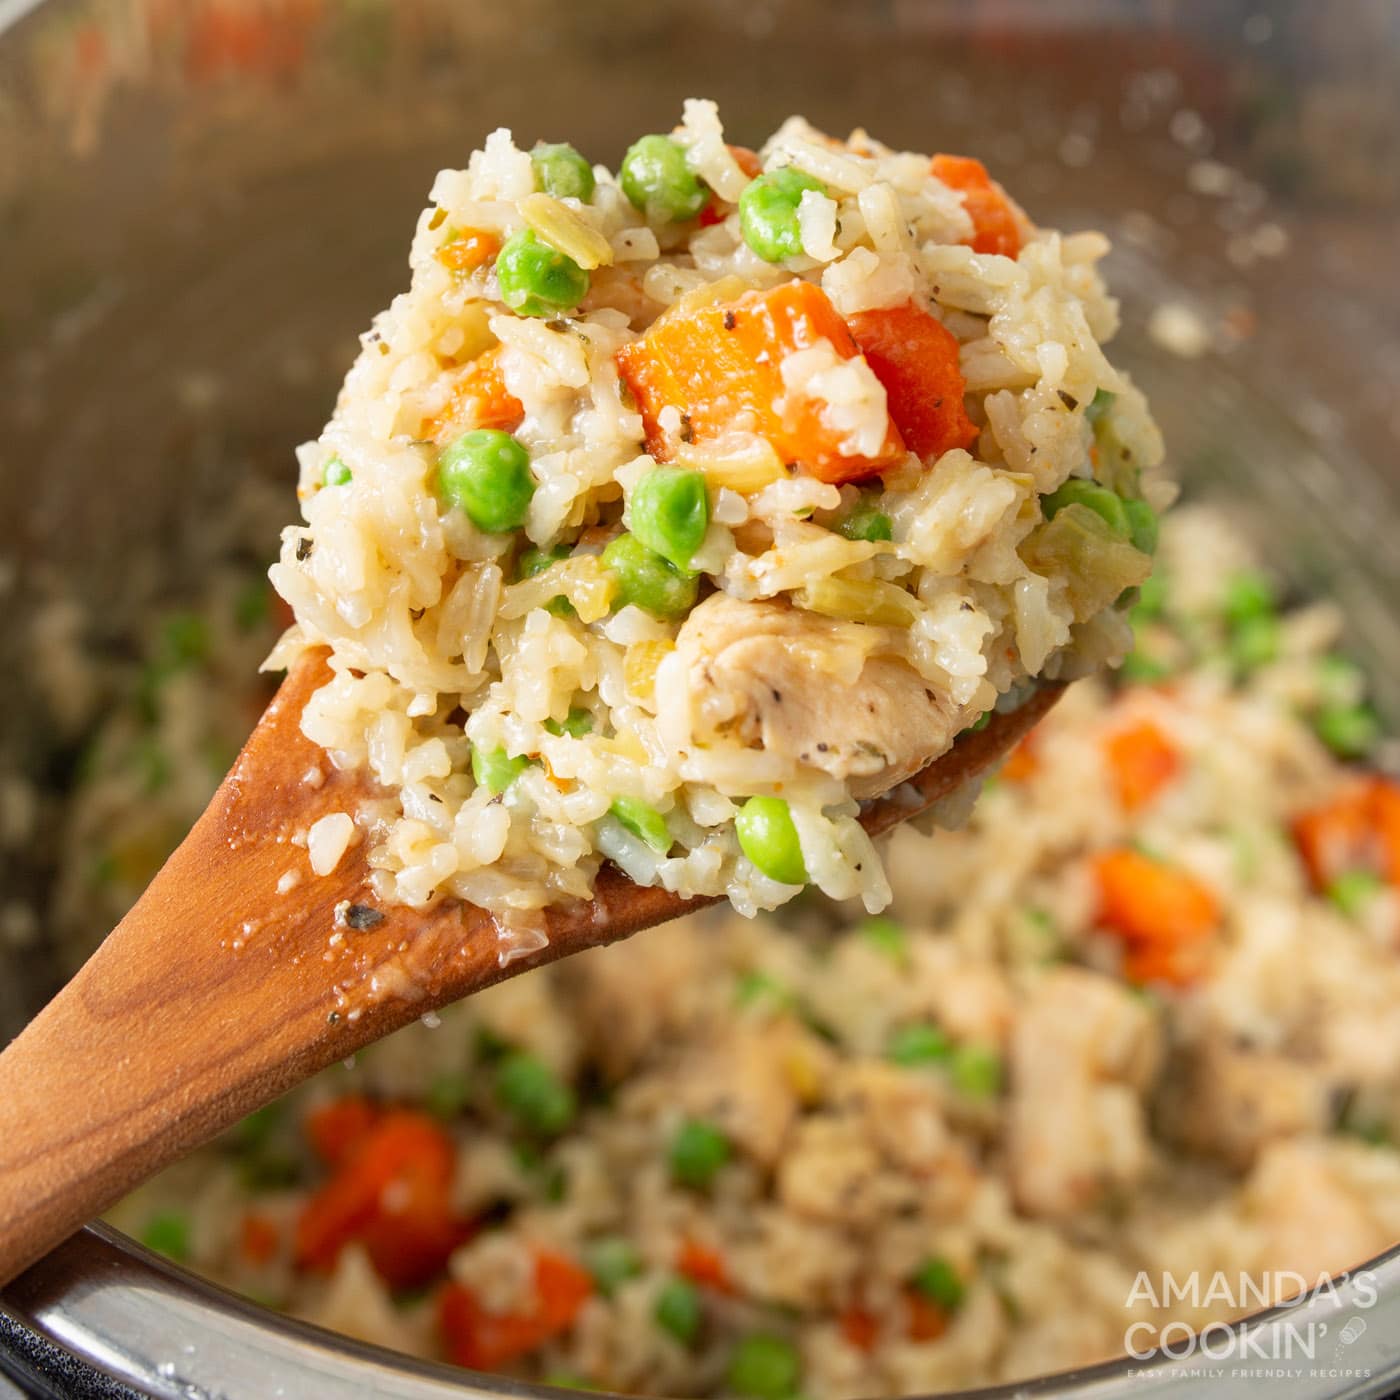 https://amandascookin.com/wp-content/uploads/2021/05/Instant-Pot-Chicken-and-Rice-RC-SQ.jpg